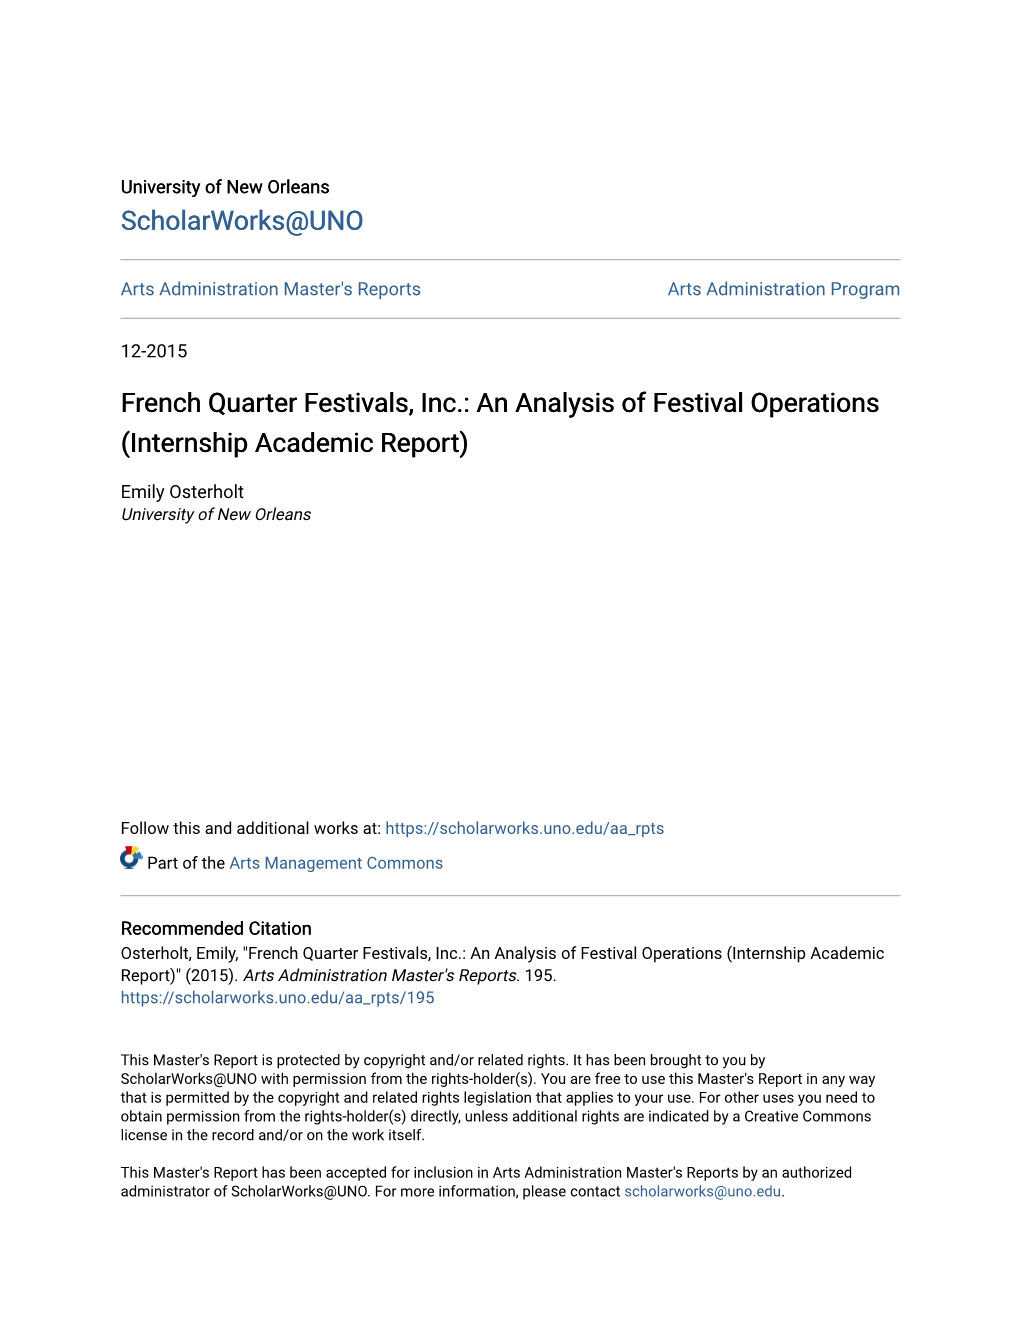 An Analysis of Festival Operations (Internship Academic Report)